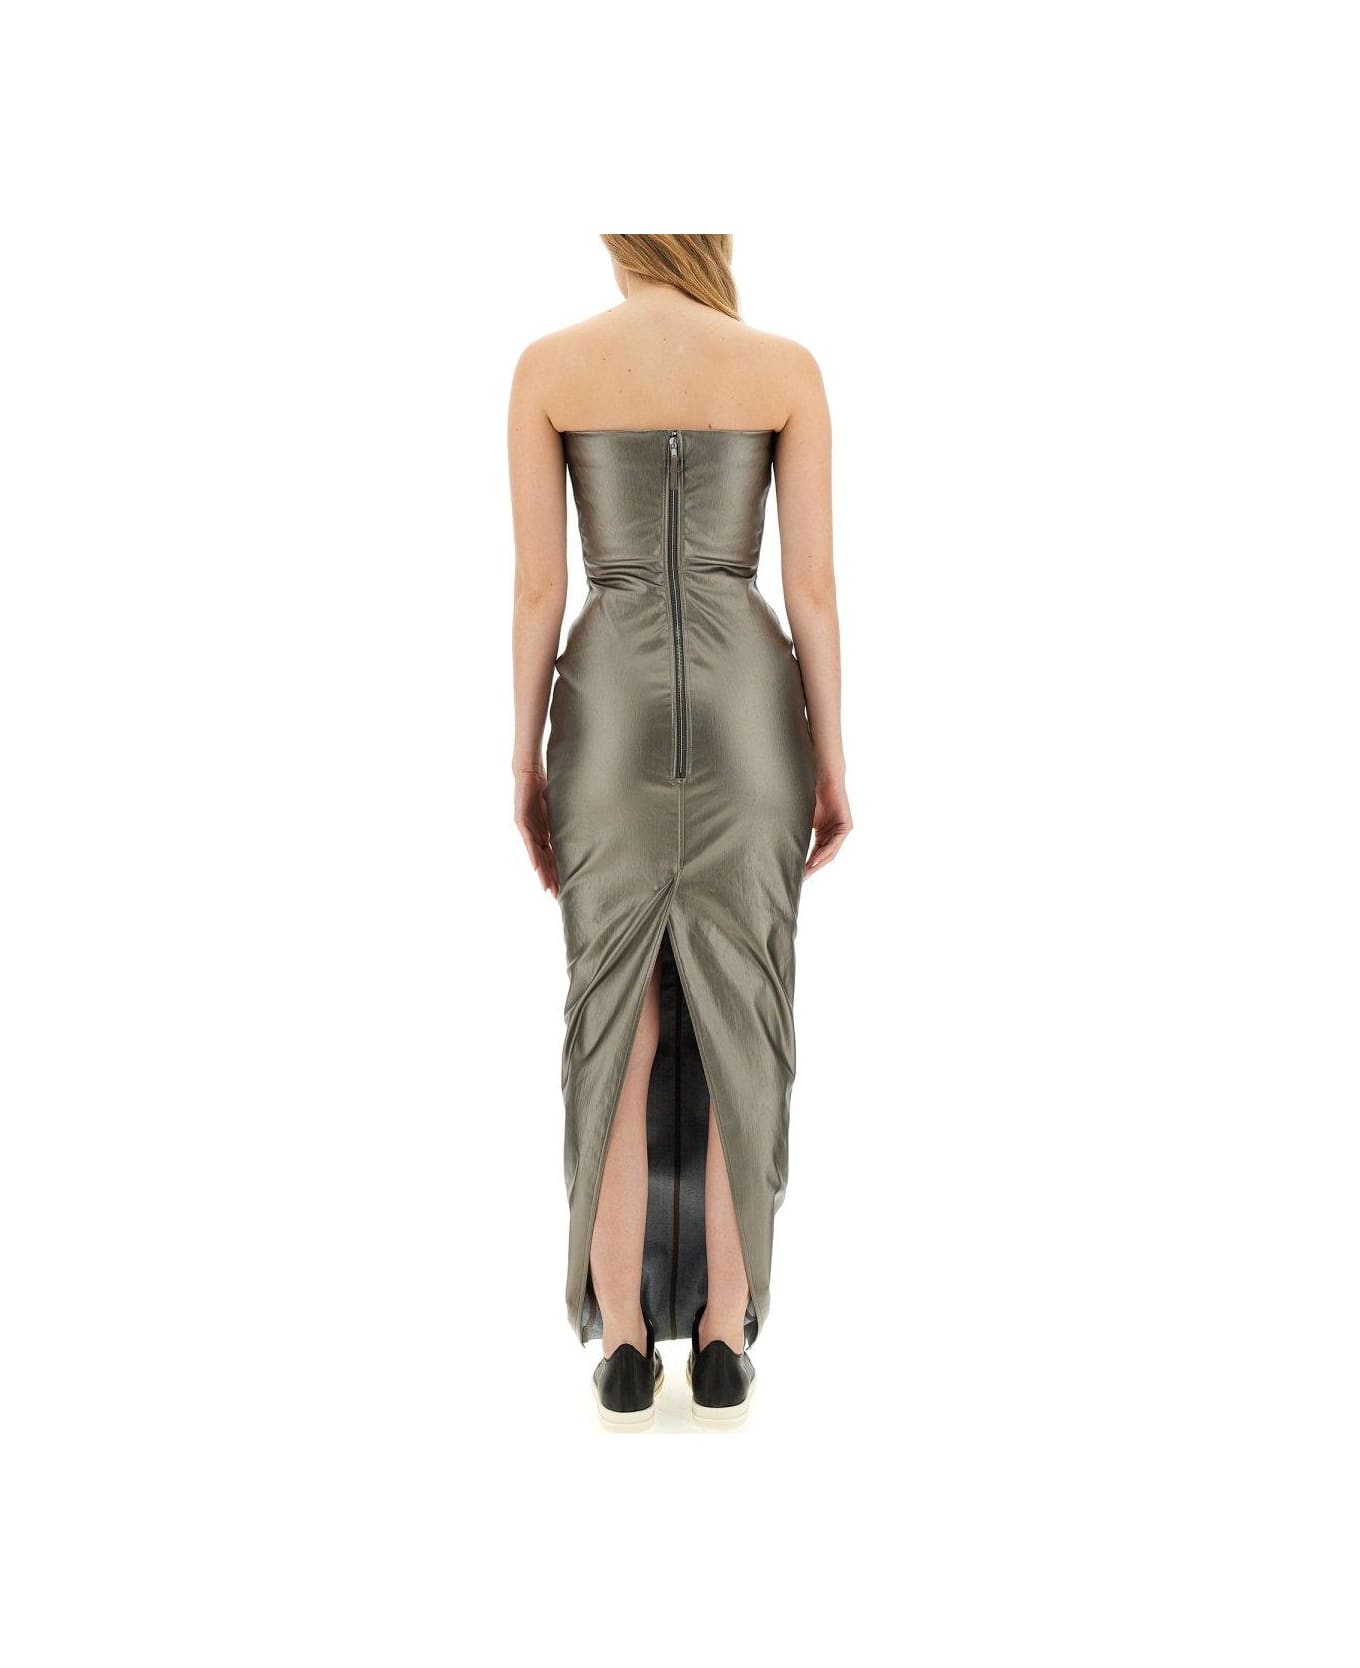 Rick Owens Floor-length Strapless Bustier Gown - GREY